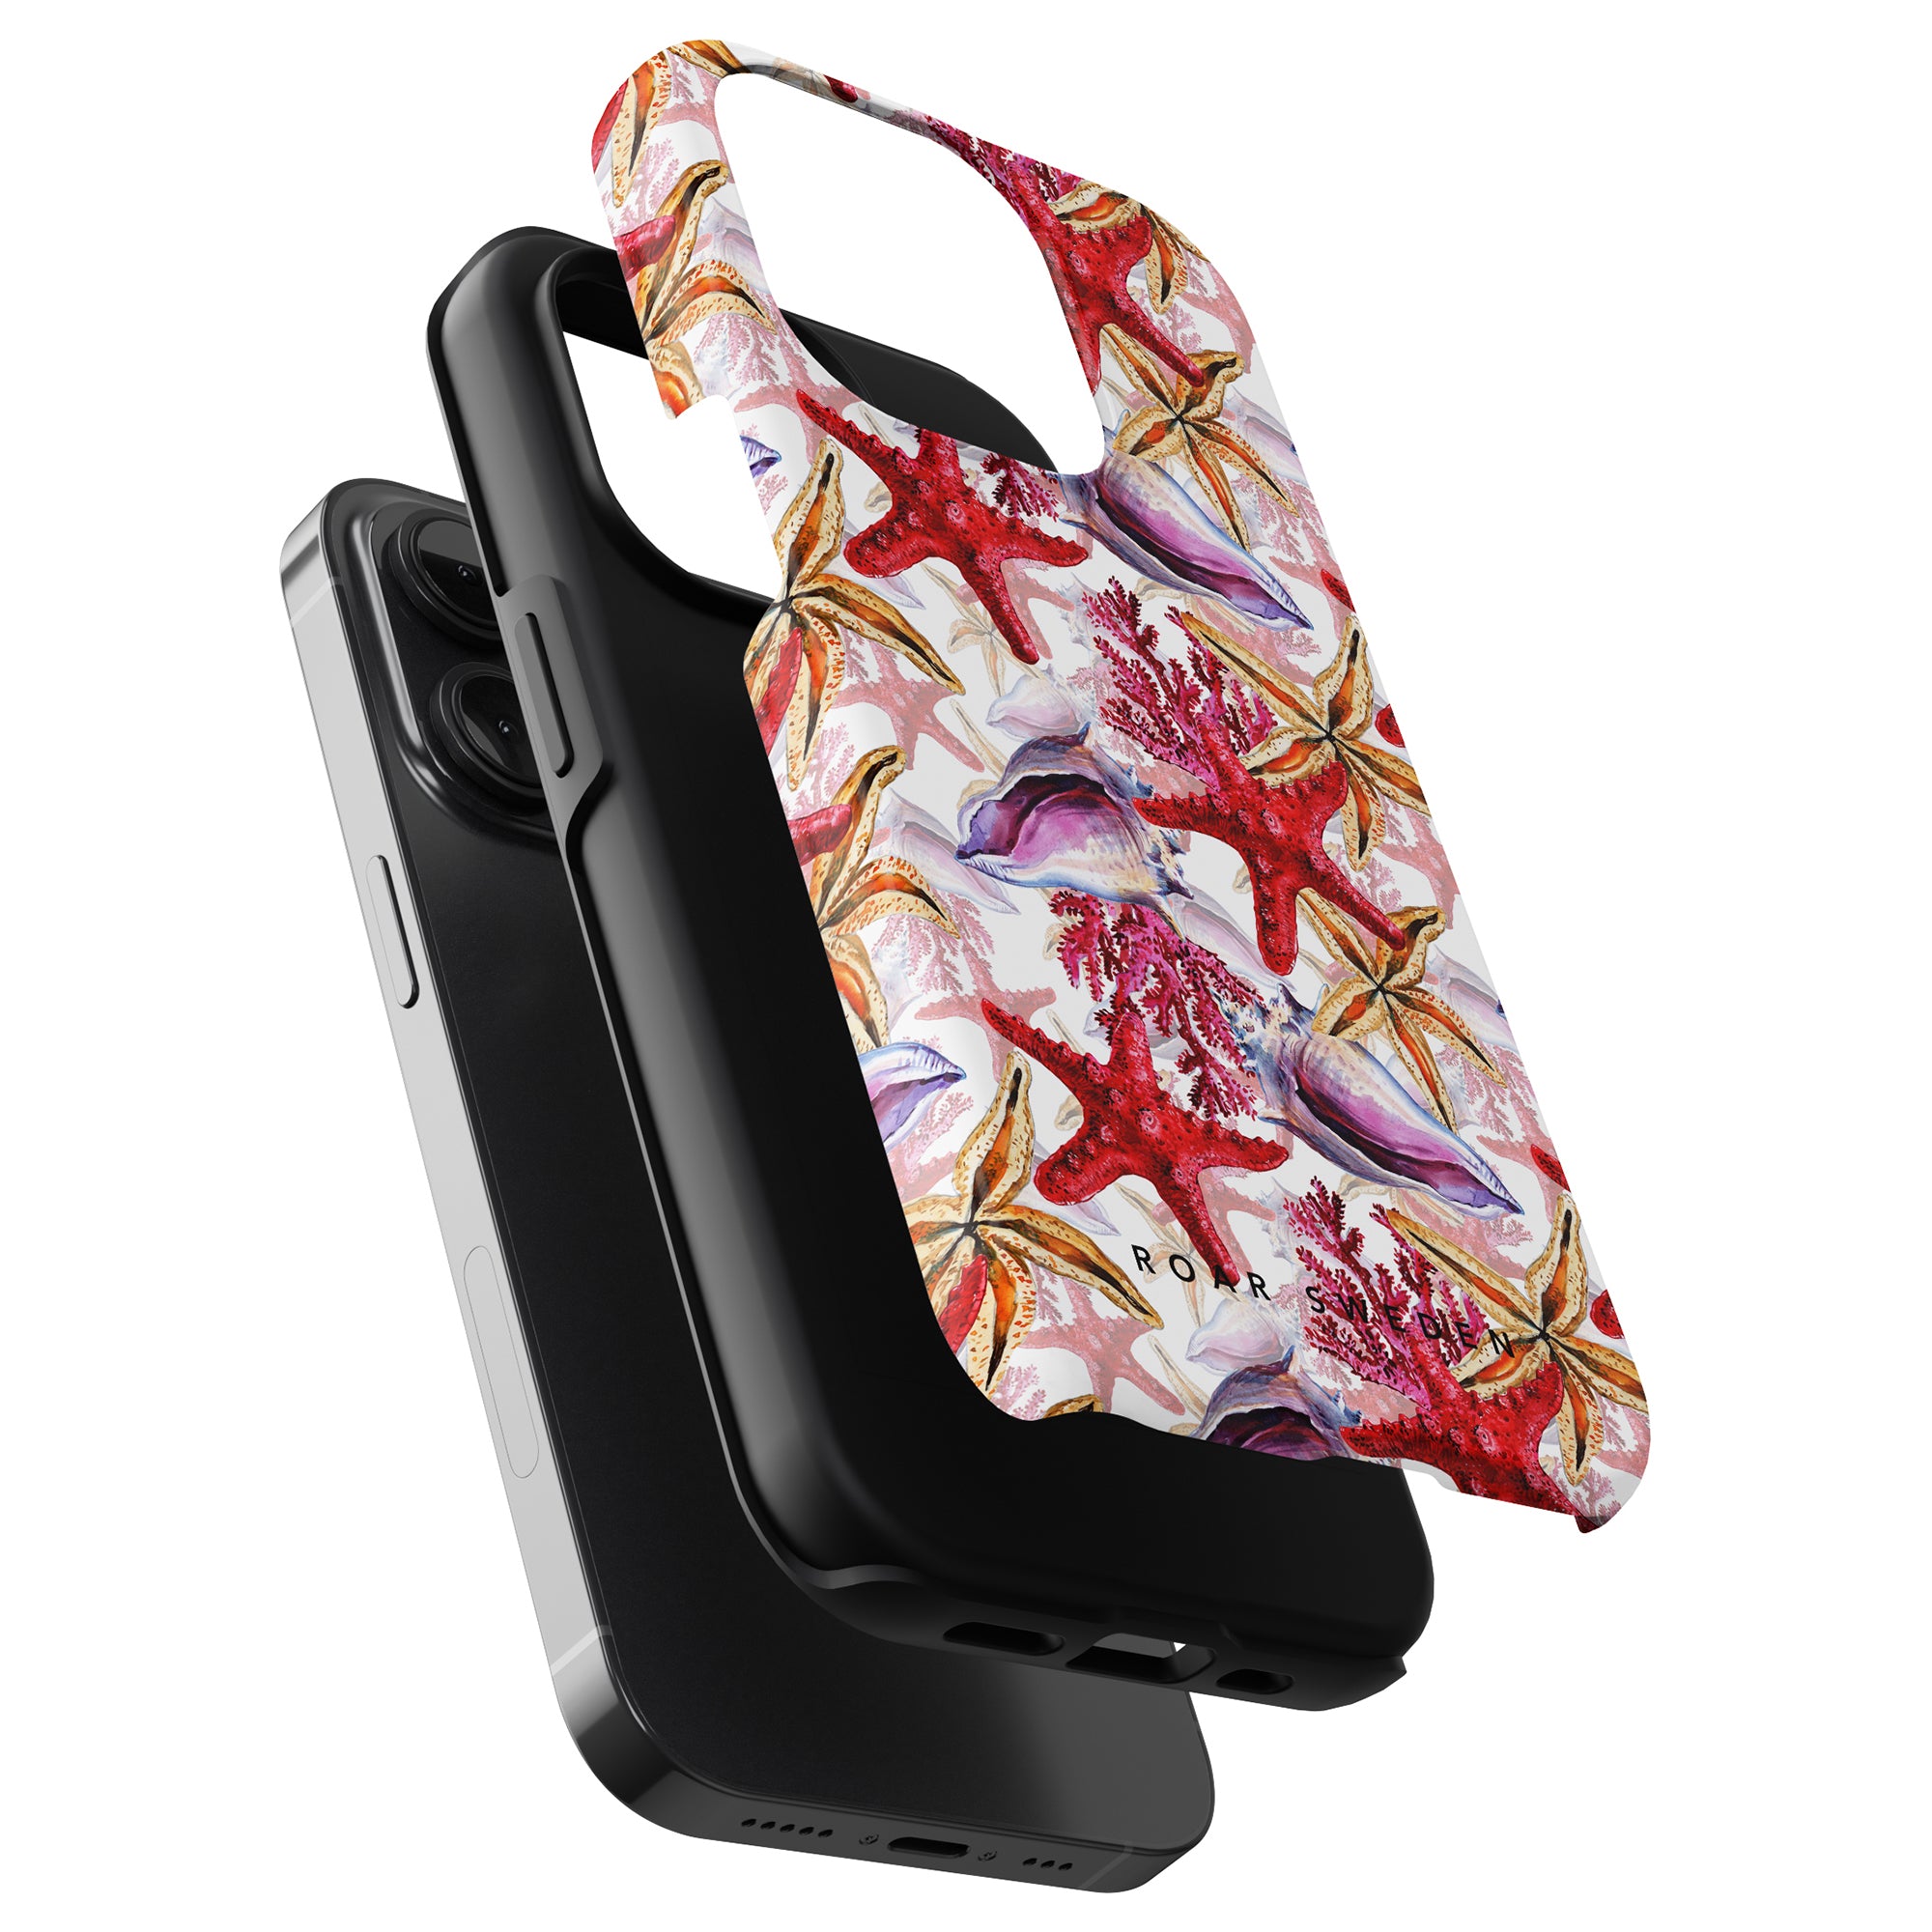 A black smartphone with a Coral Reef - Tough Case featuring starfish designs attached to a charging dock.